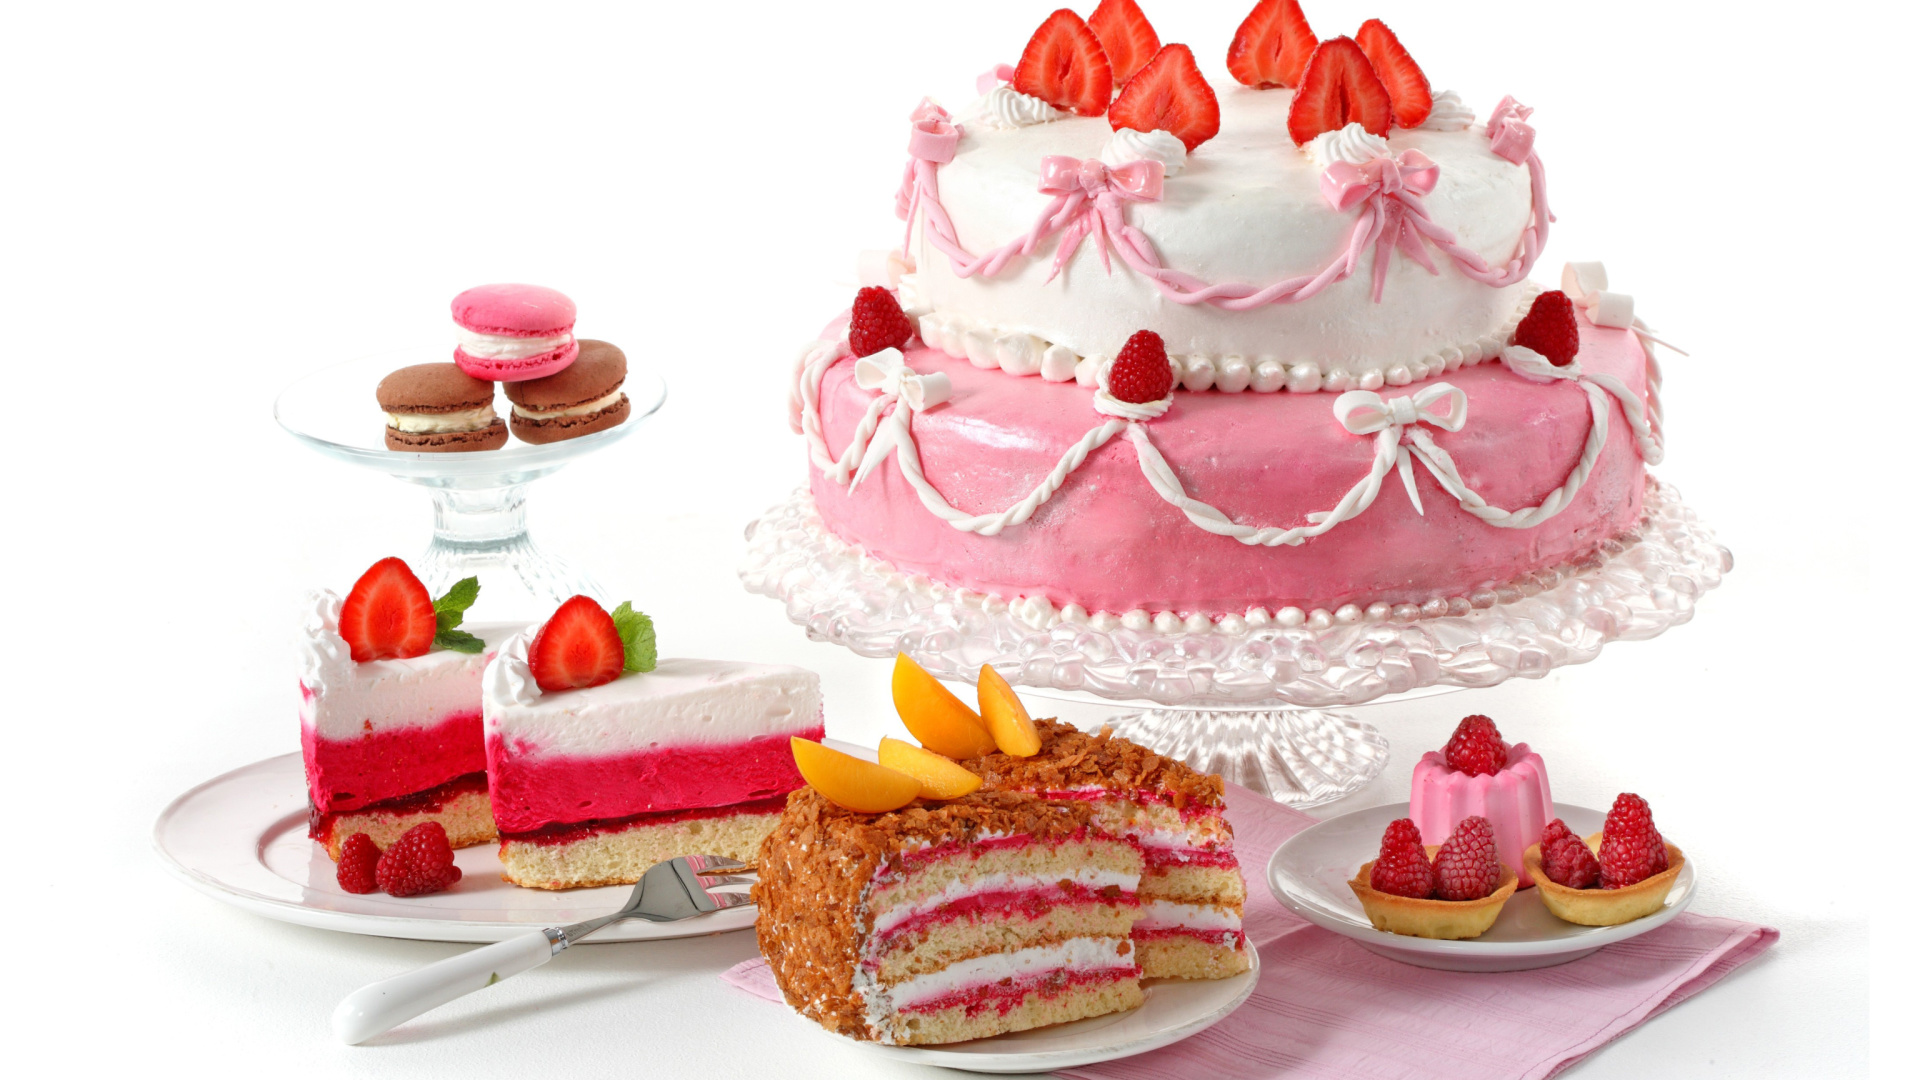 Strawberry biscuit cake wallpaper 1920x1080